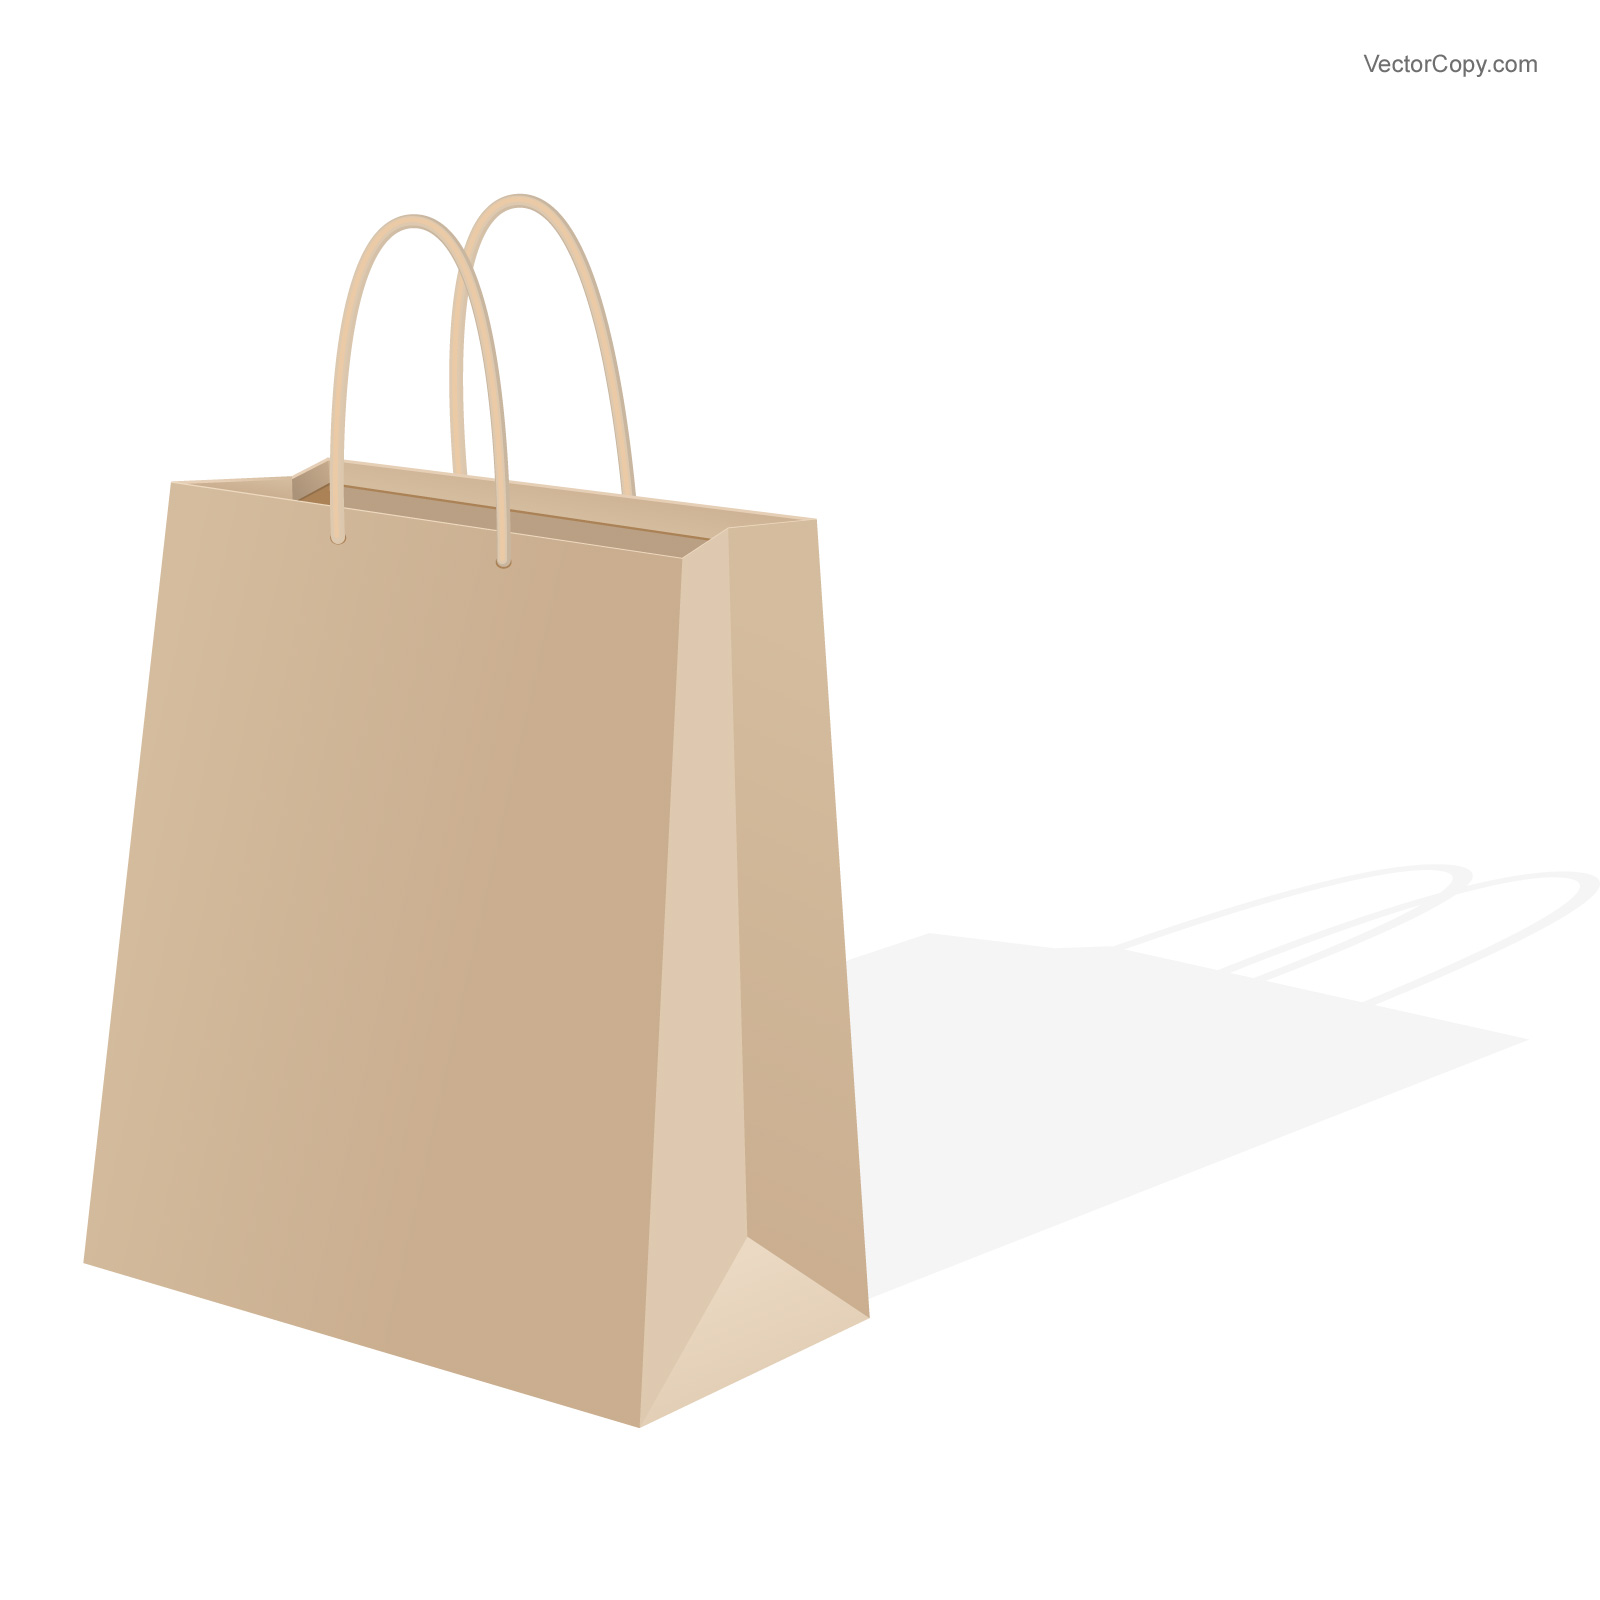 Paper Shopping Bag Vector Free